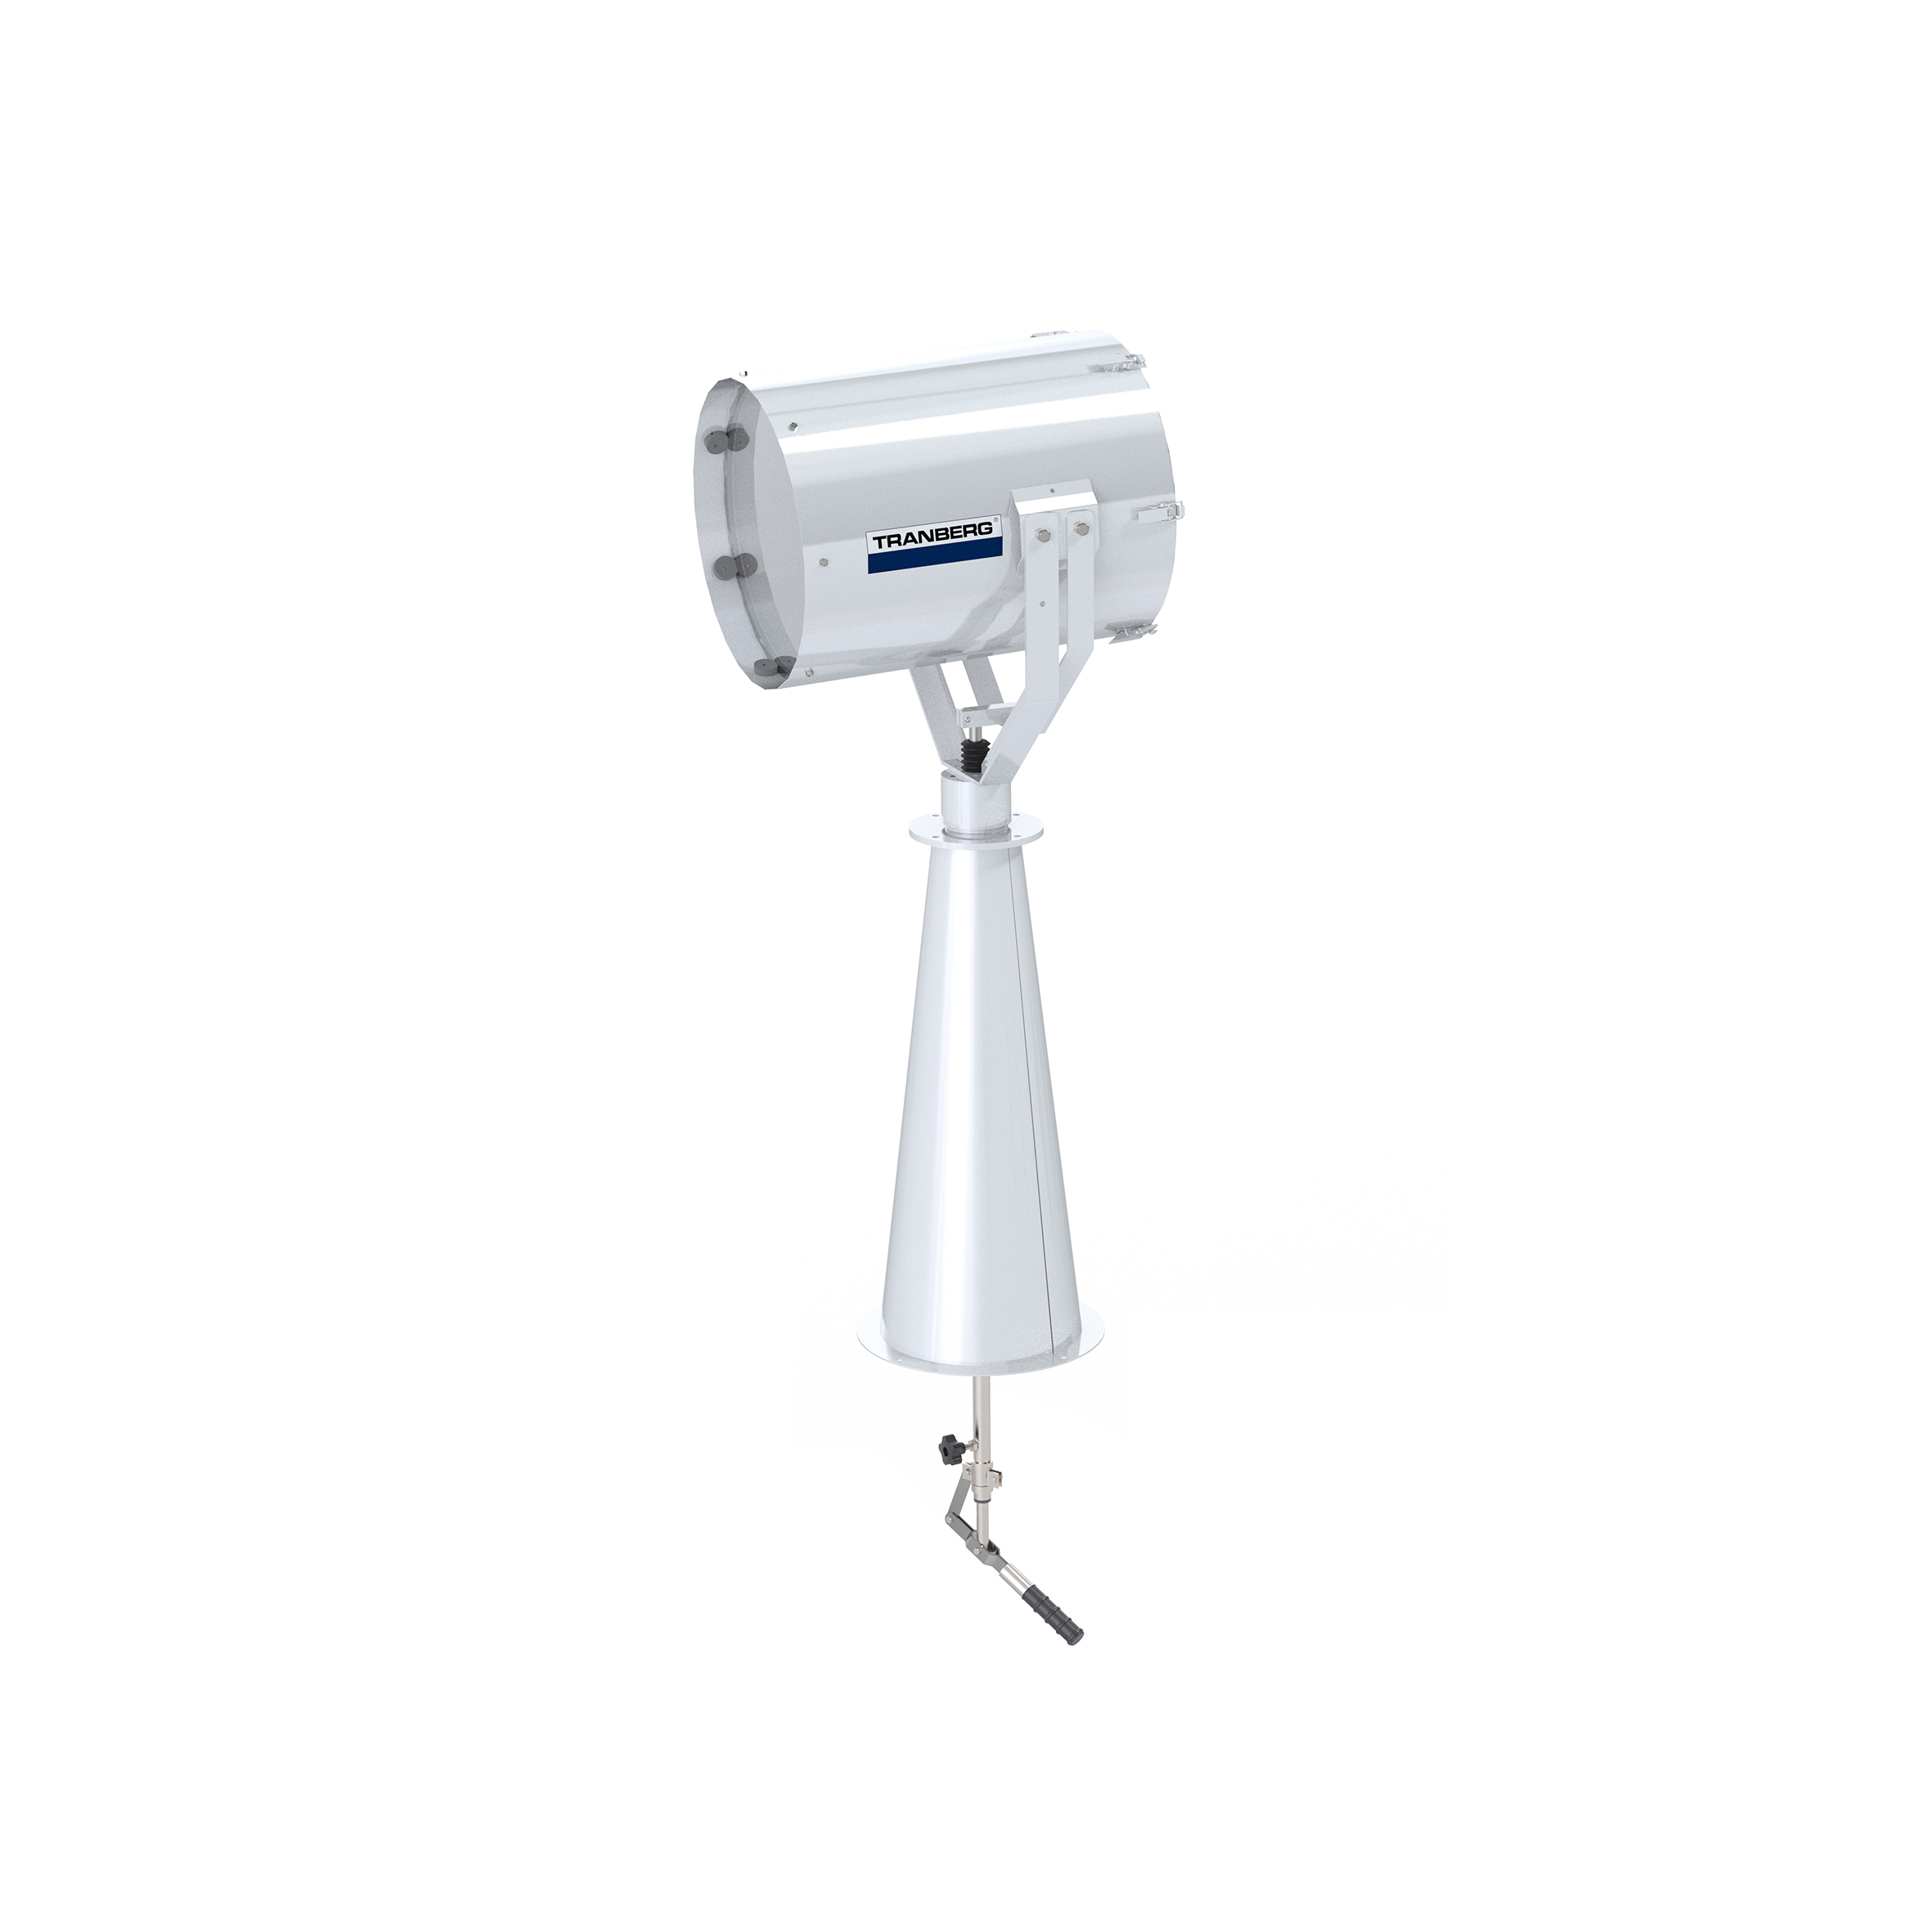 TEF 2630 Searchlight: Halogen 1000W bulb incl, 110V, Bridge Controlled, Stainless Steel, W/800 mm pe photo